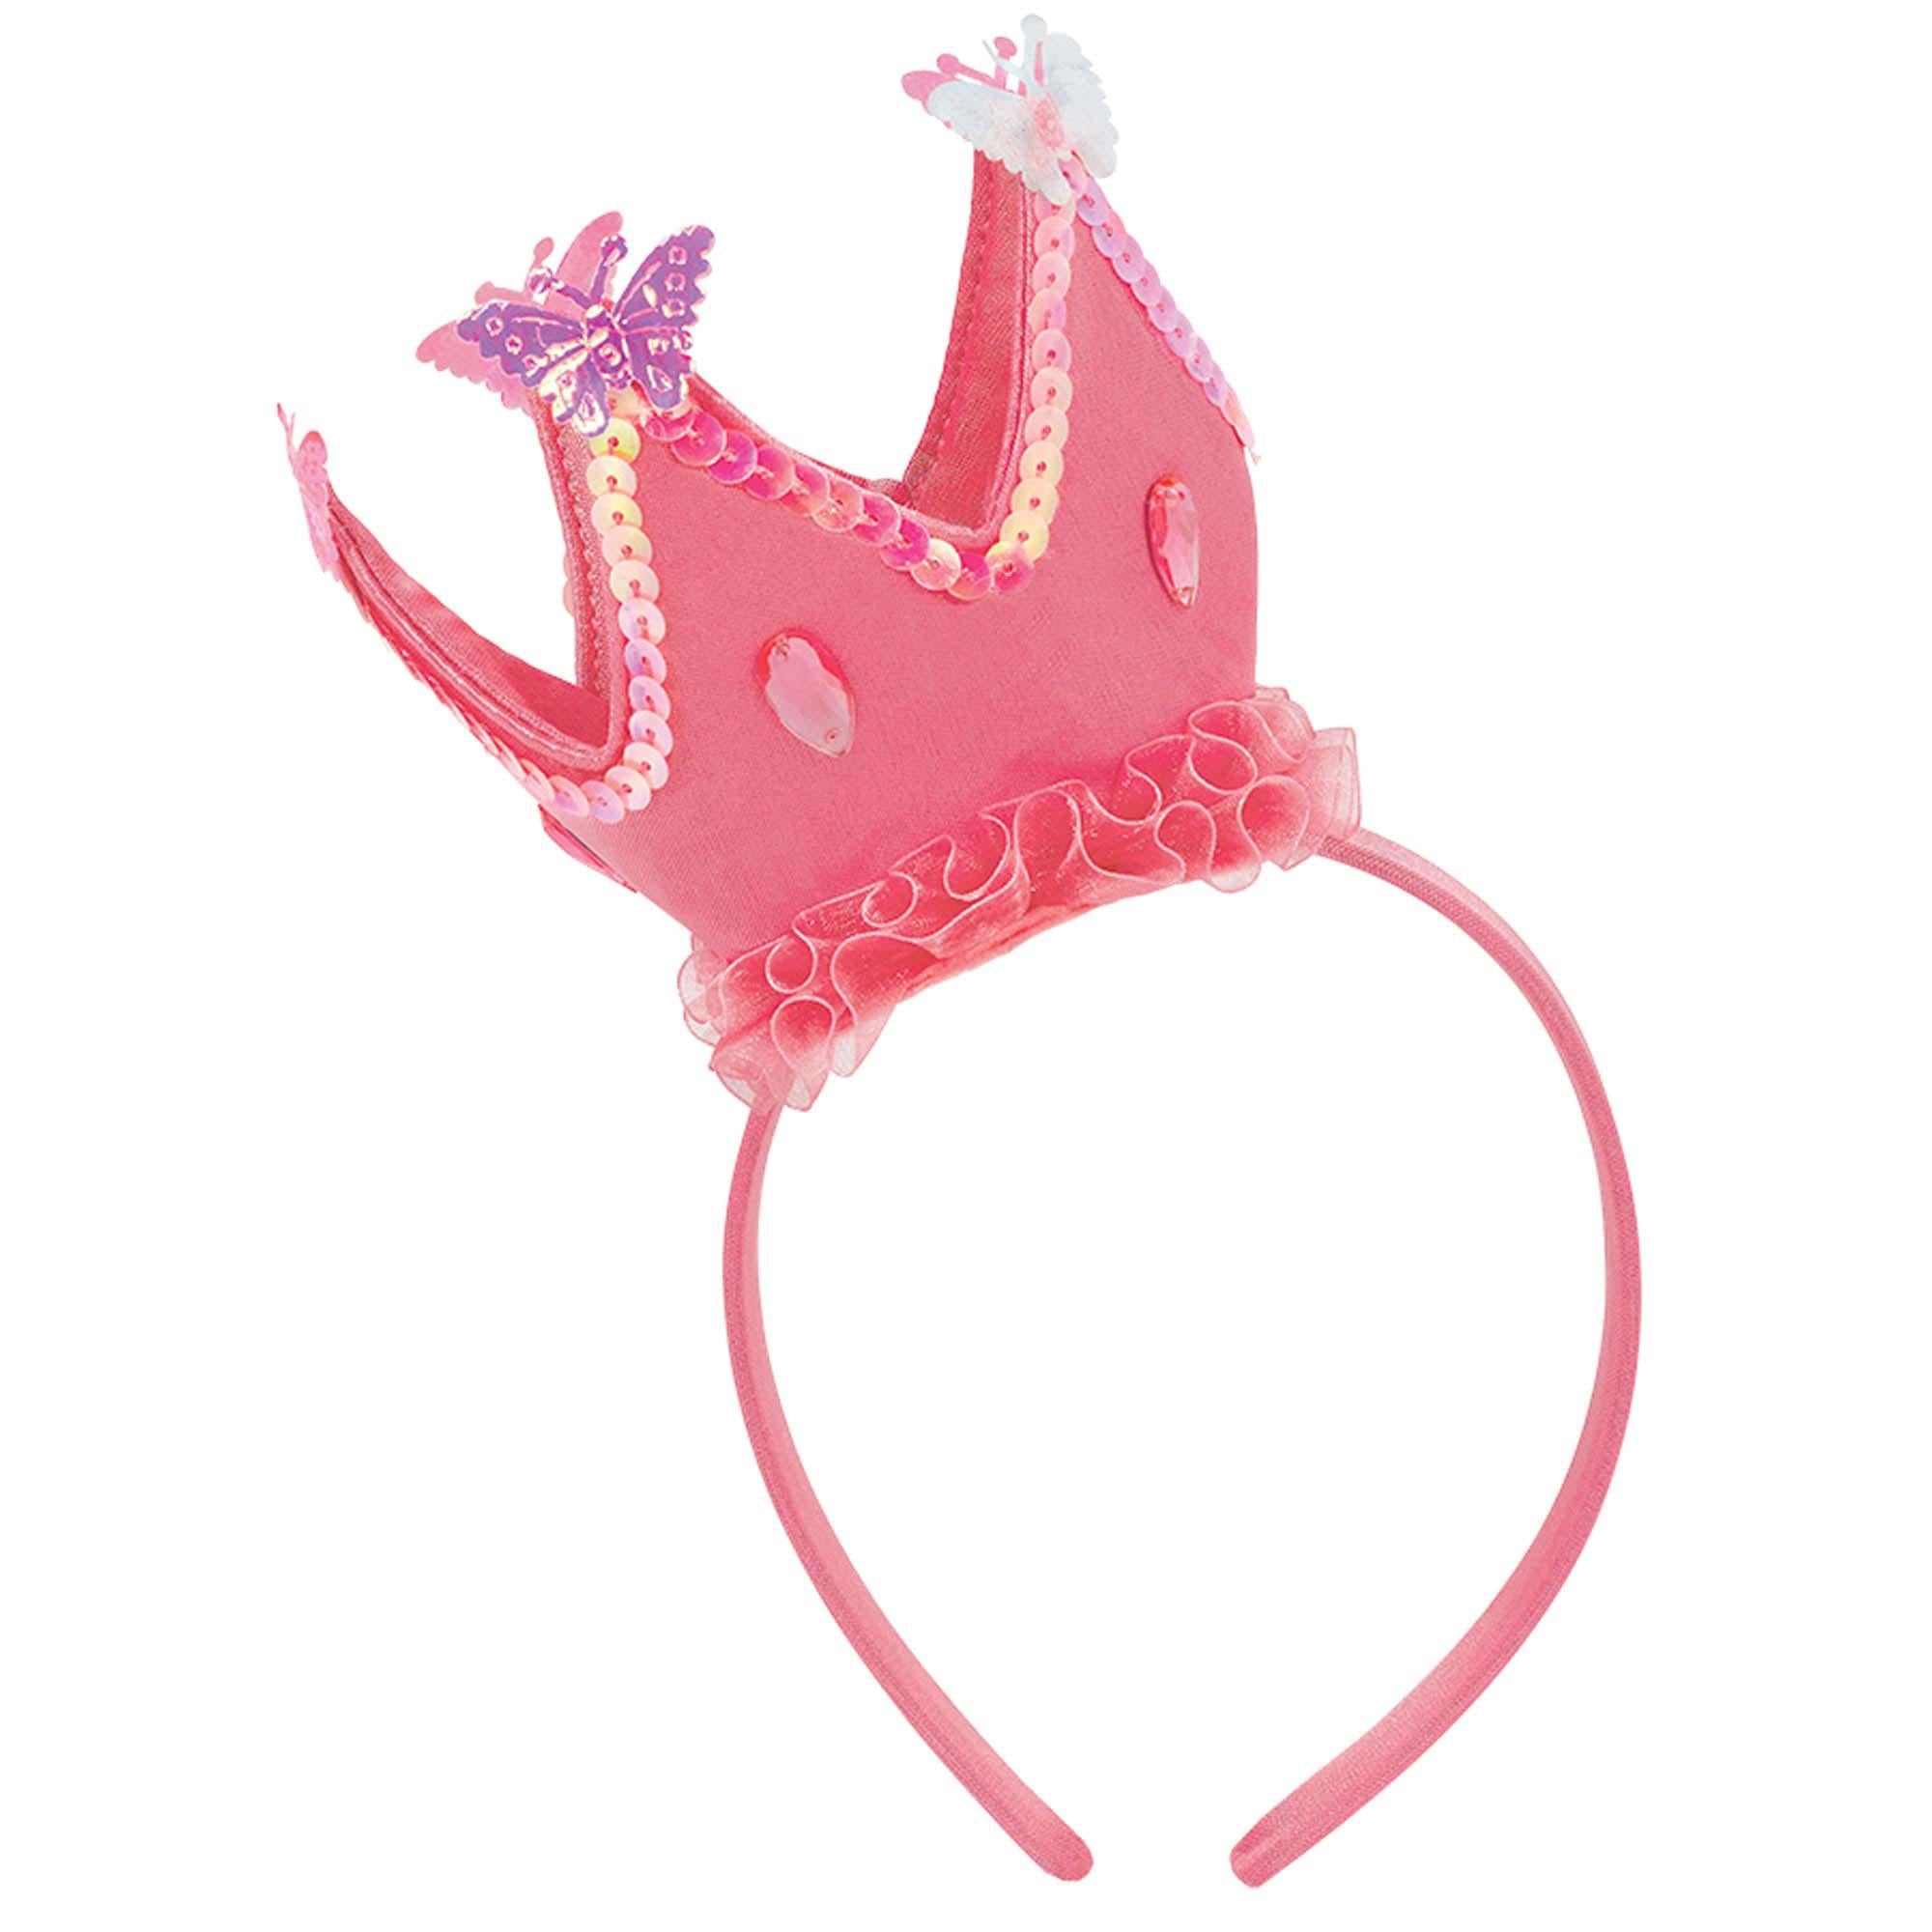 Woodland Princess Deluxe Fabric Headband Costumes & Apparel - Party Centre - Party Centre